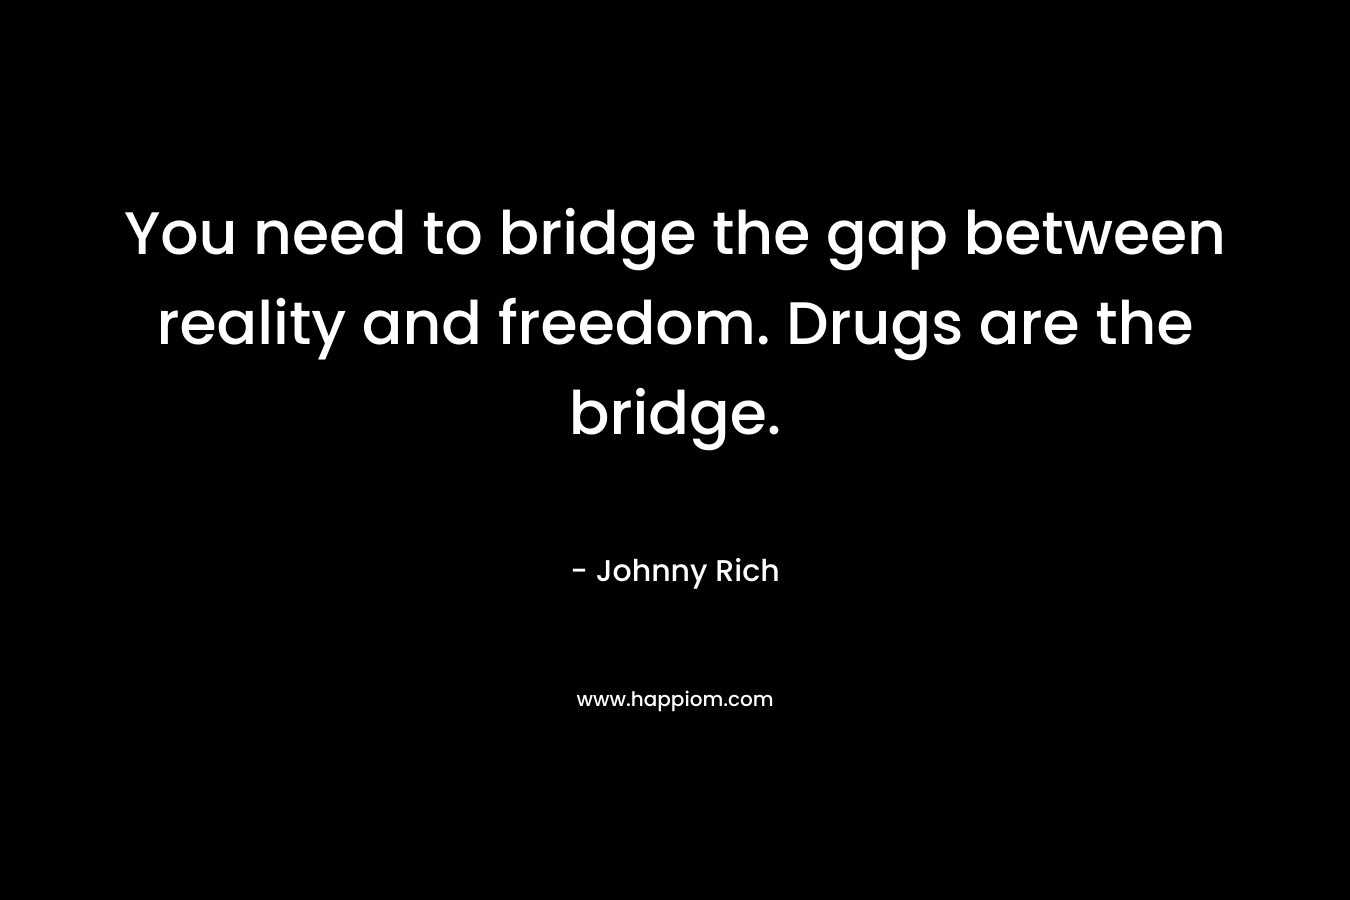 You need to bridge the gap between reality and freedom. Drugs are the bridge.